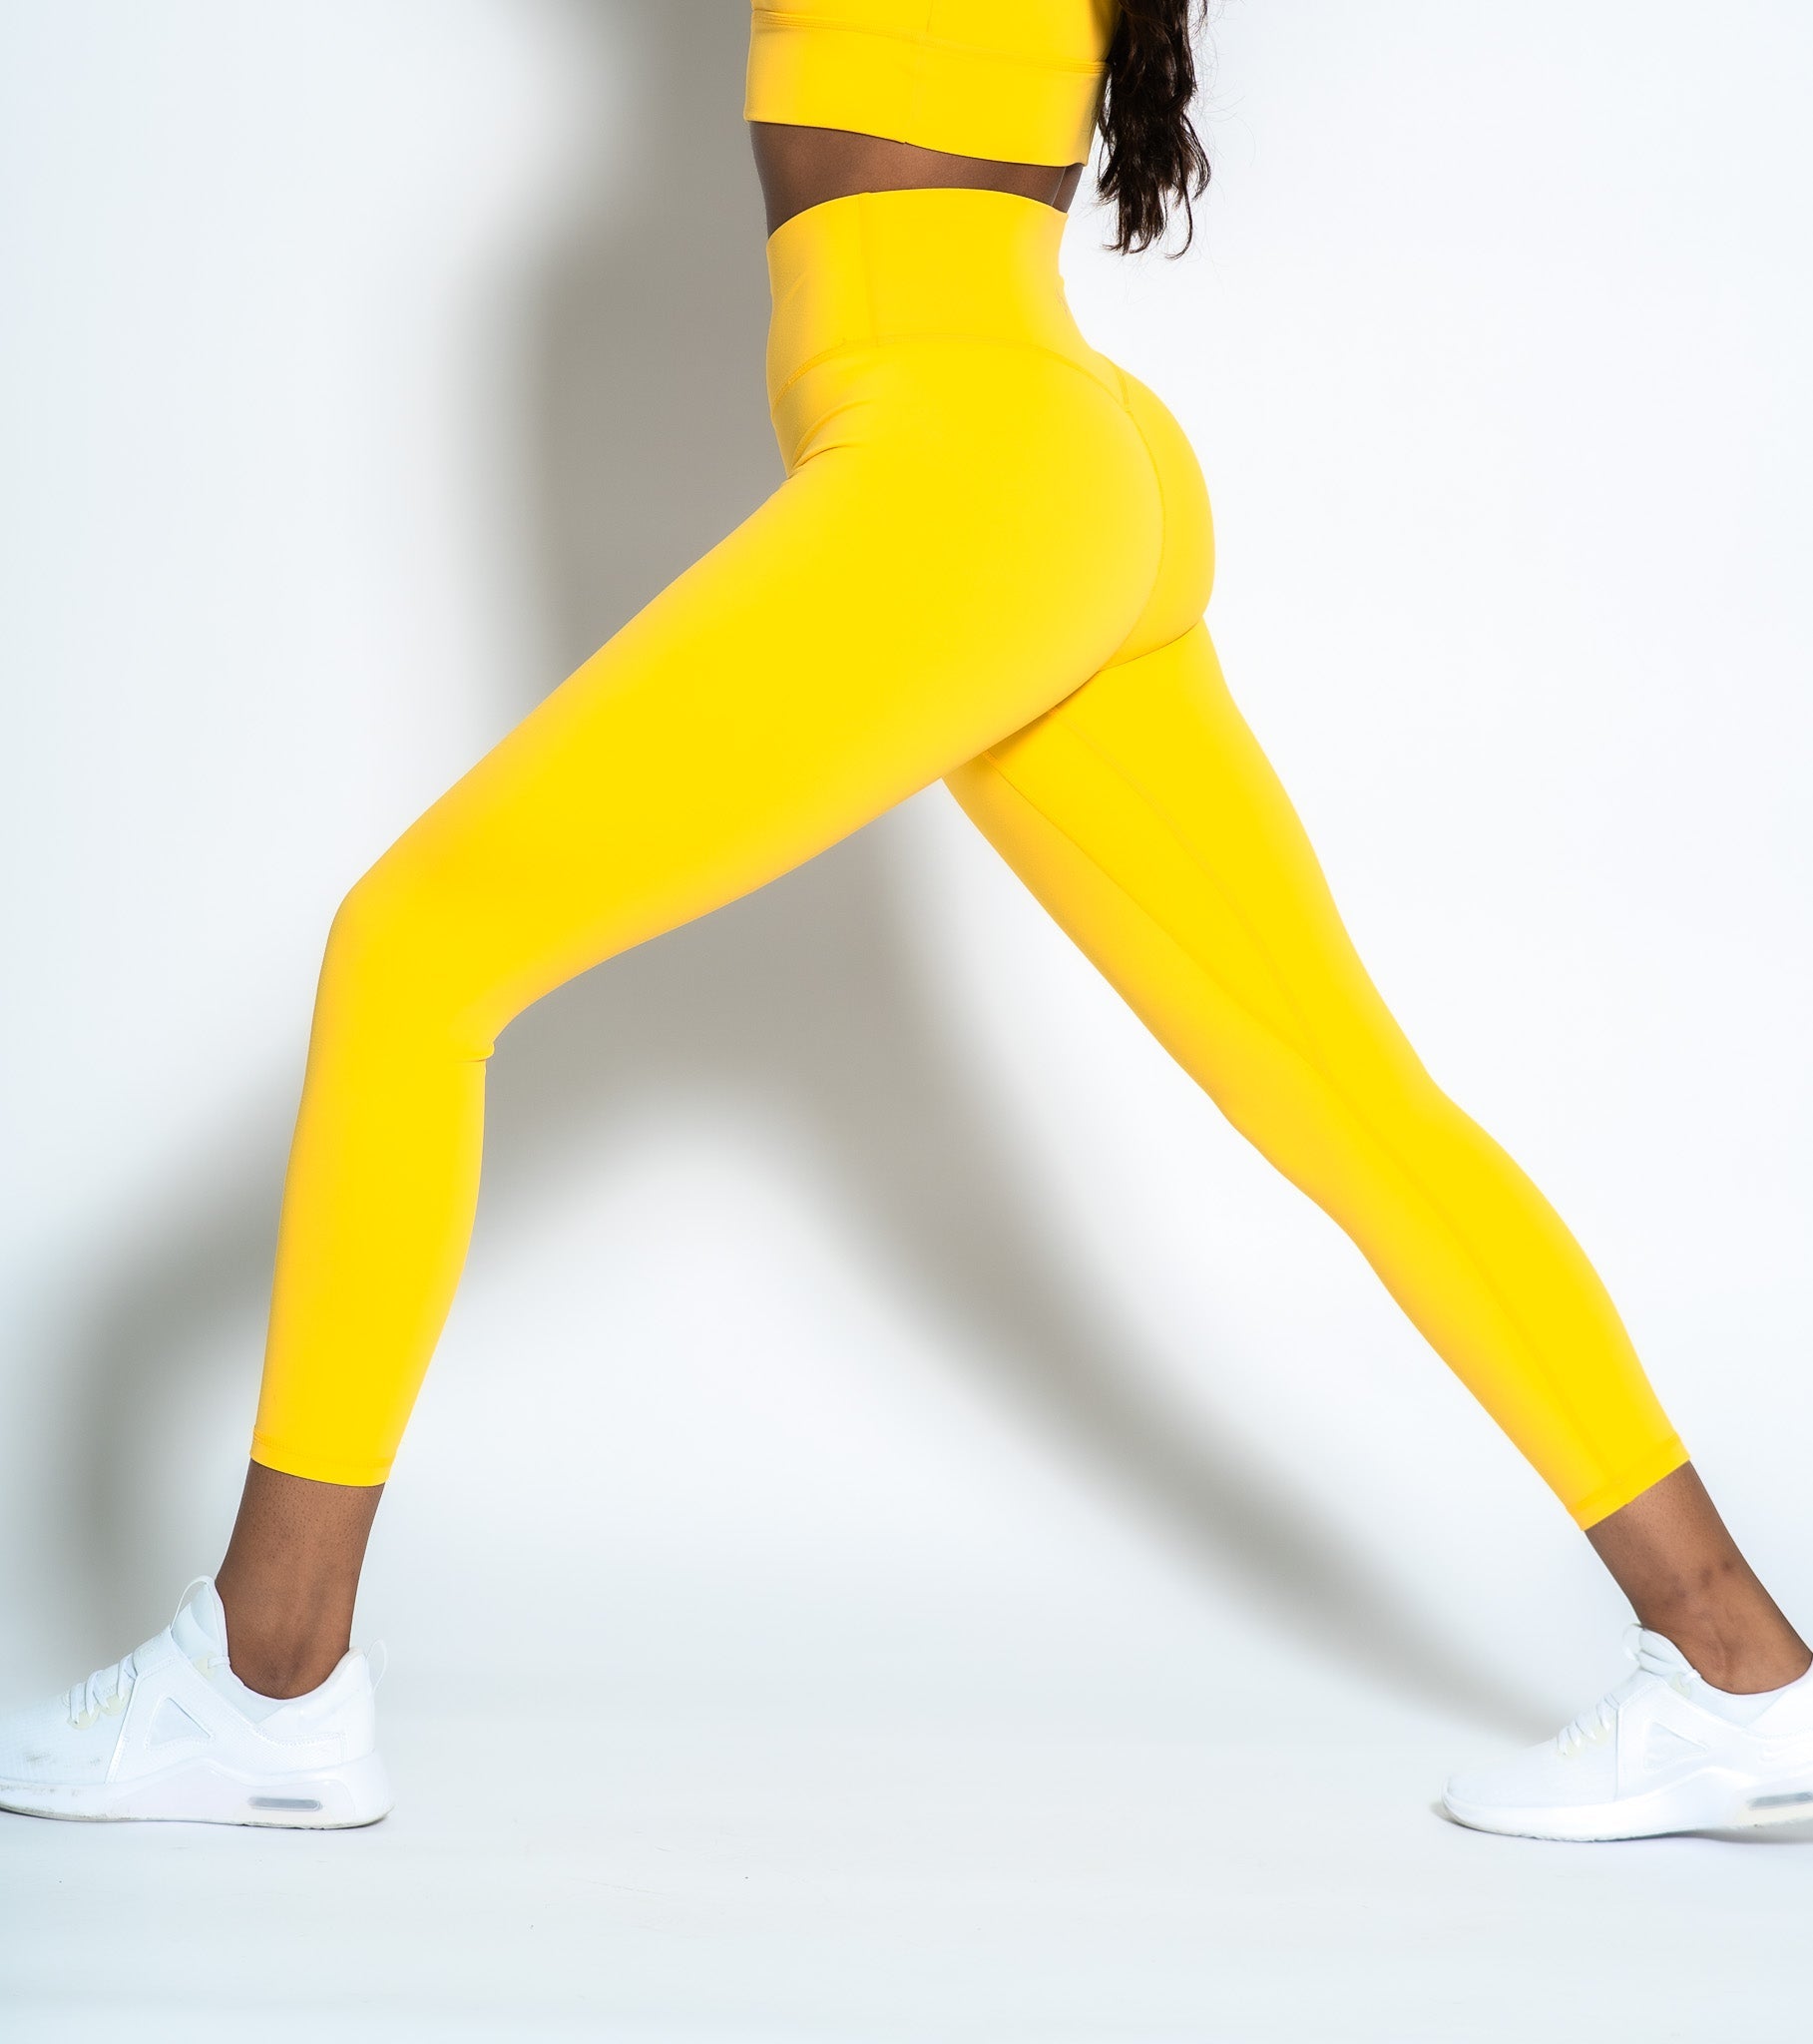 FOUND: The Best Athletic Legging // 11 Pairs Tested - Living in Yellow